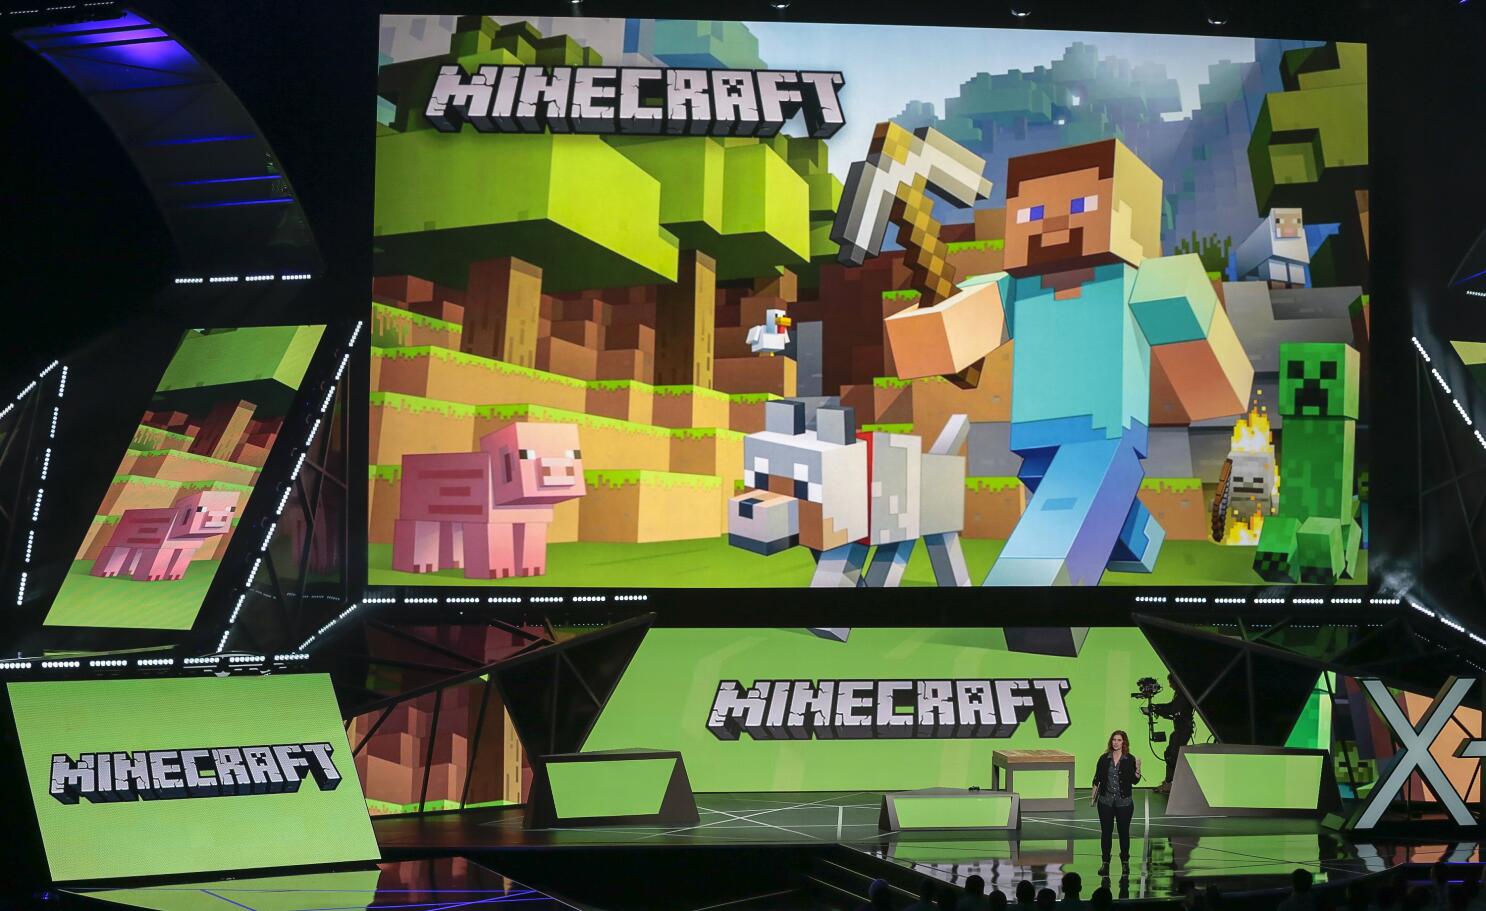 Minecraft adds tribute to Technoblade after streamer's death - The Verge